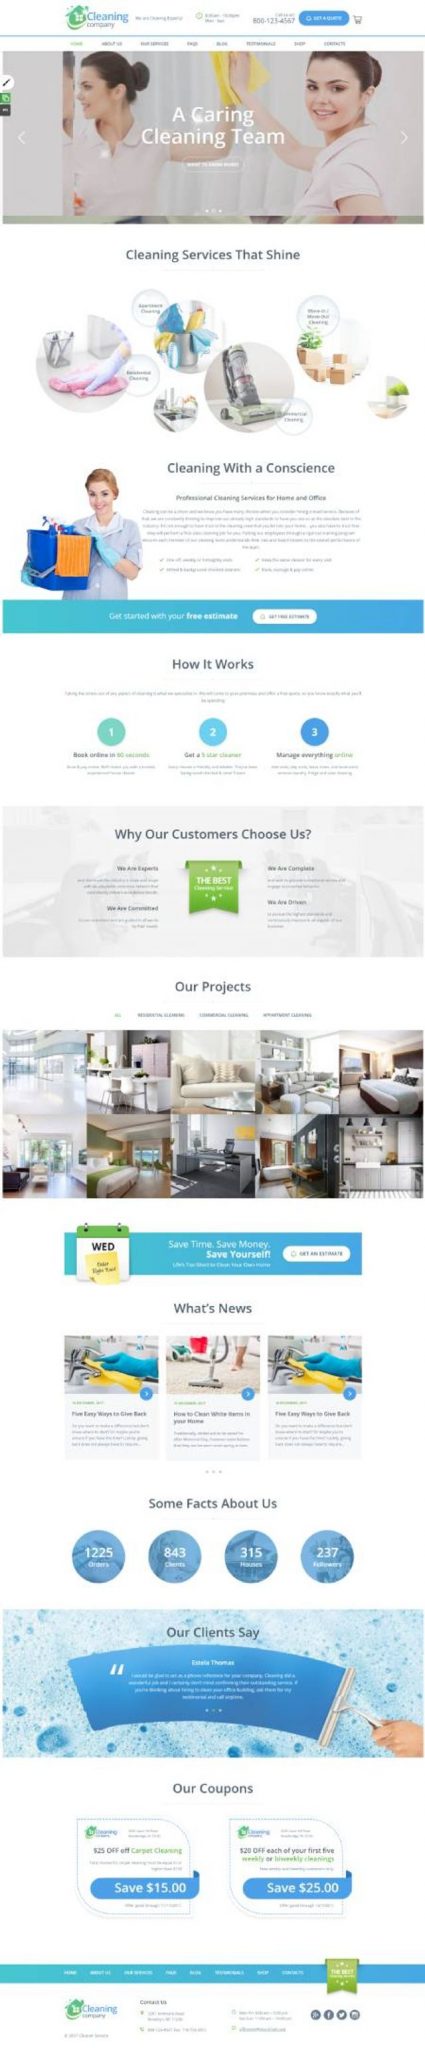 GD0260 – Mẫu Website Dịch Vụ Vệ Sinh Cleaning Services